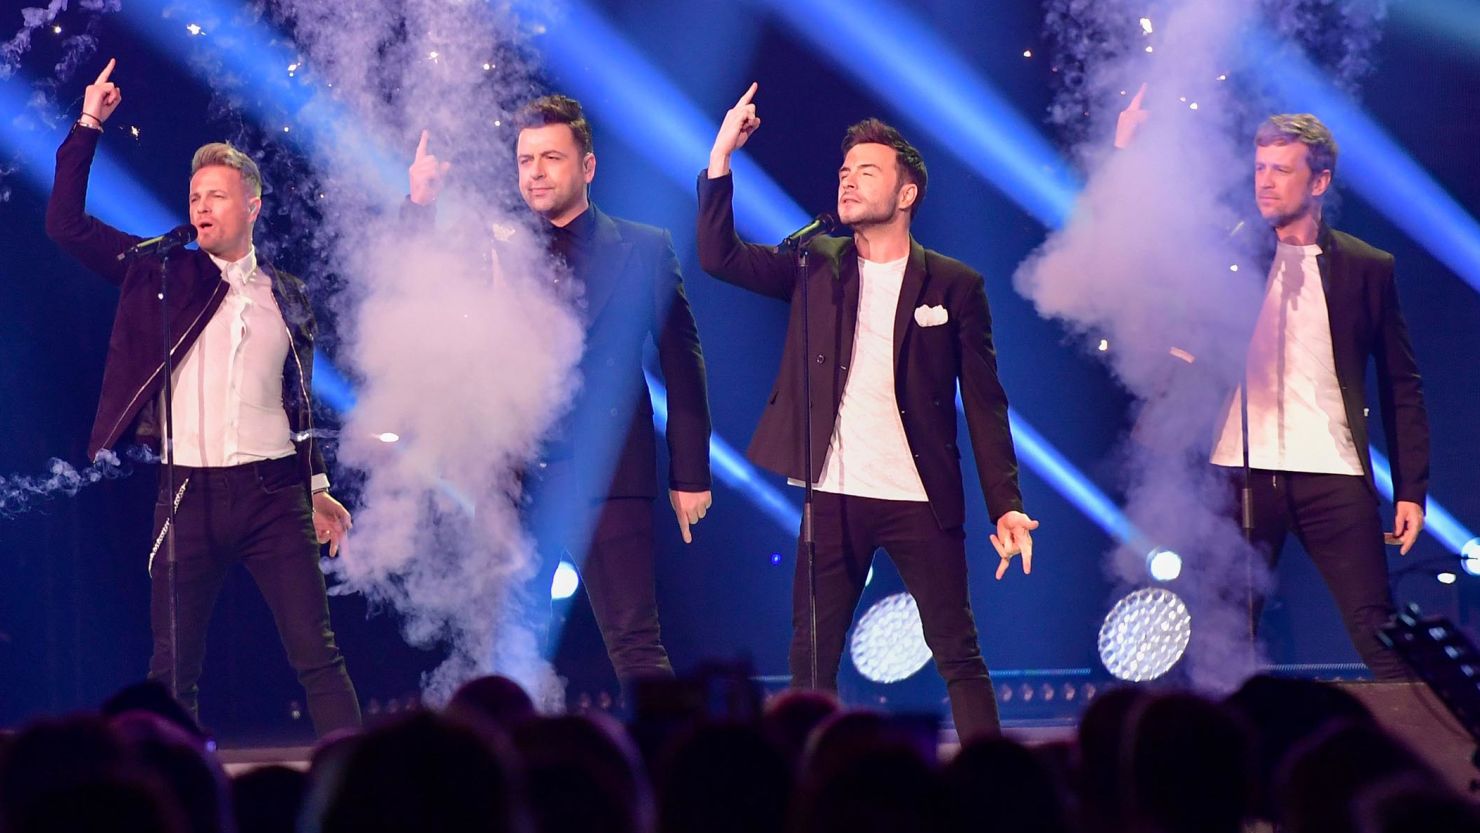 Westlife have announced they will play Wembley Stadium this summer.